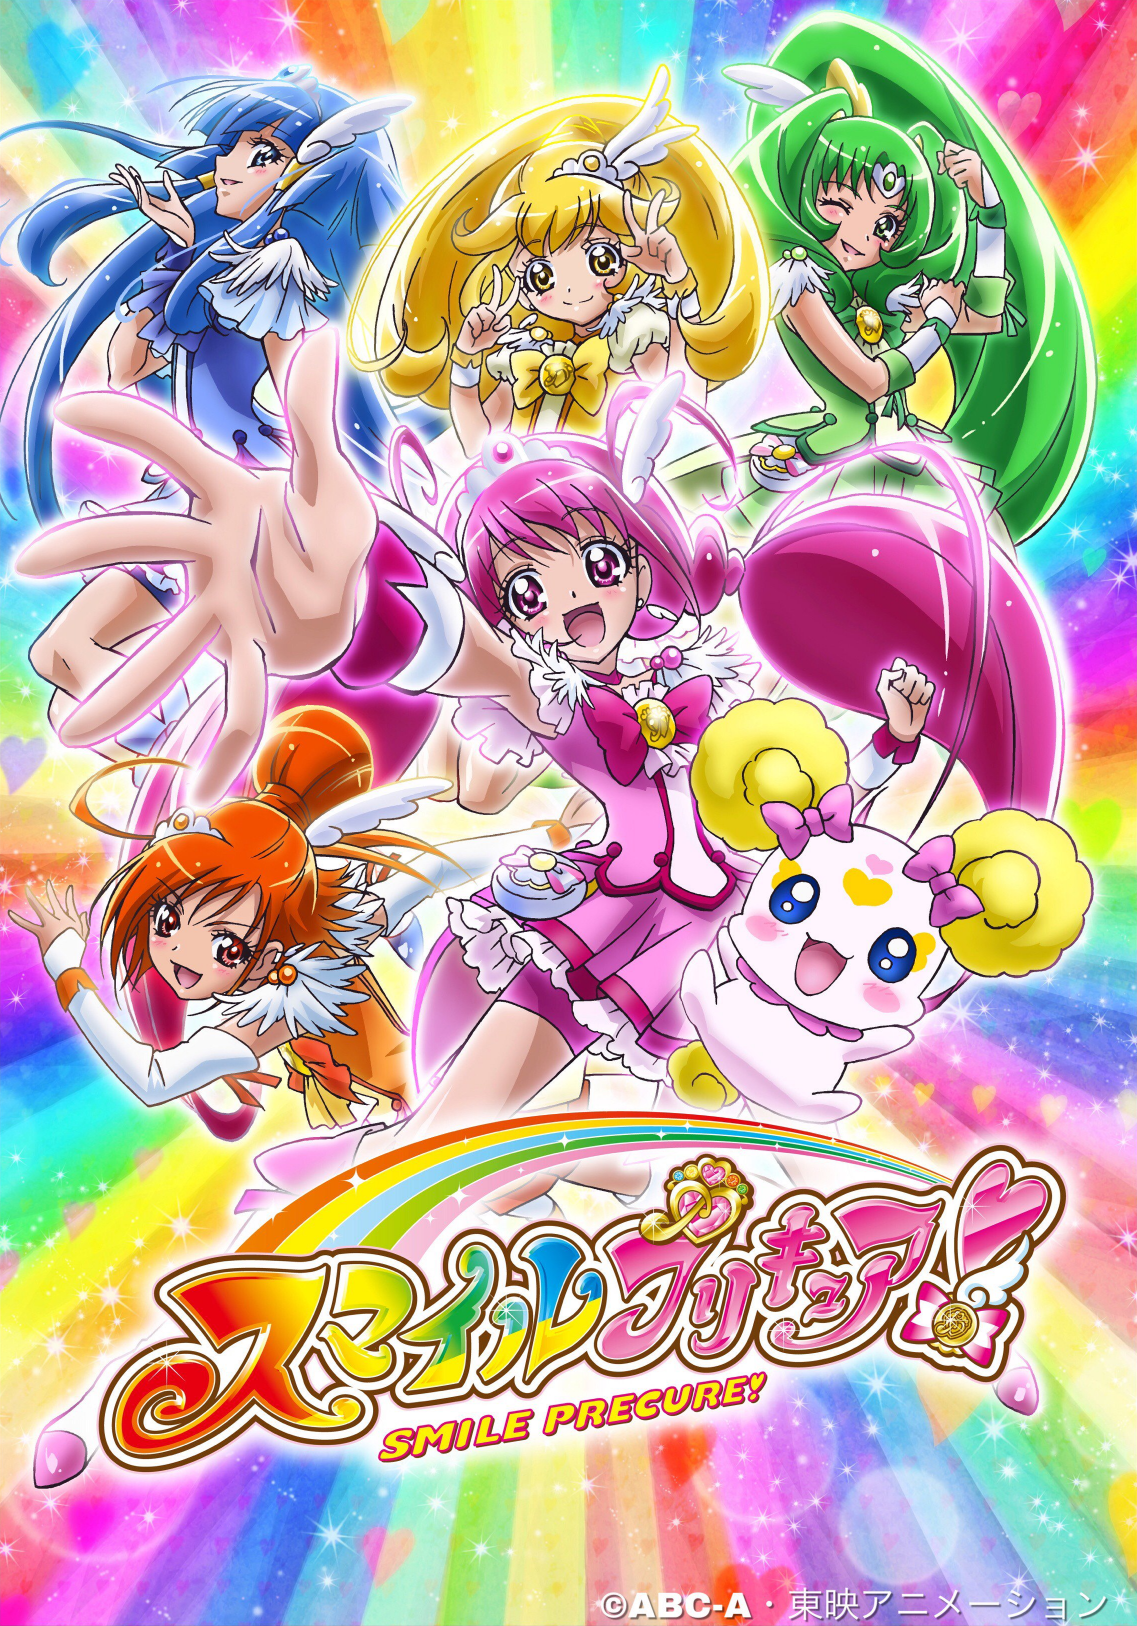 TropicalRouge Precure TV  Anime News Network